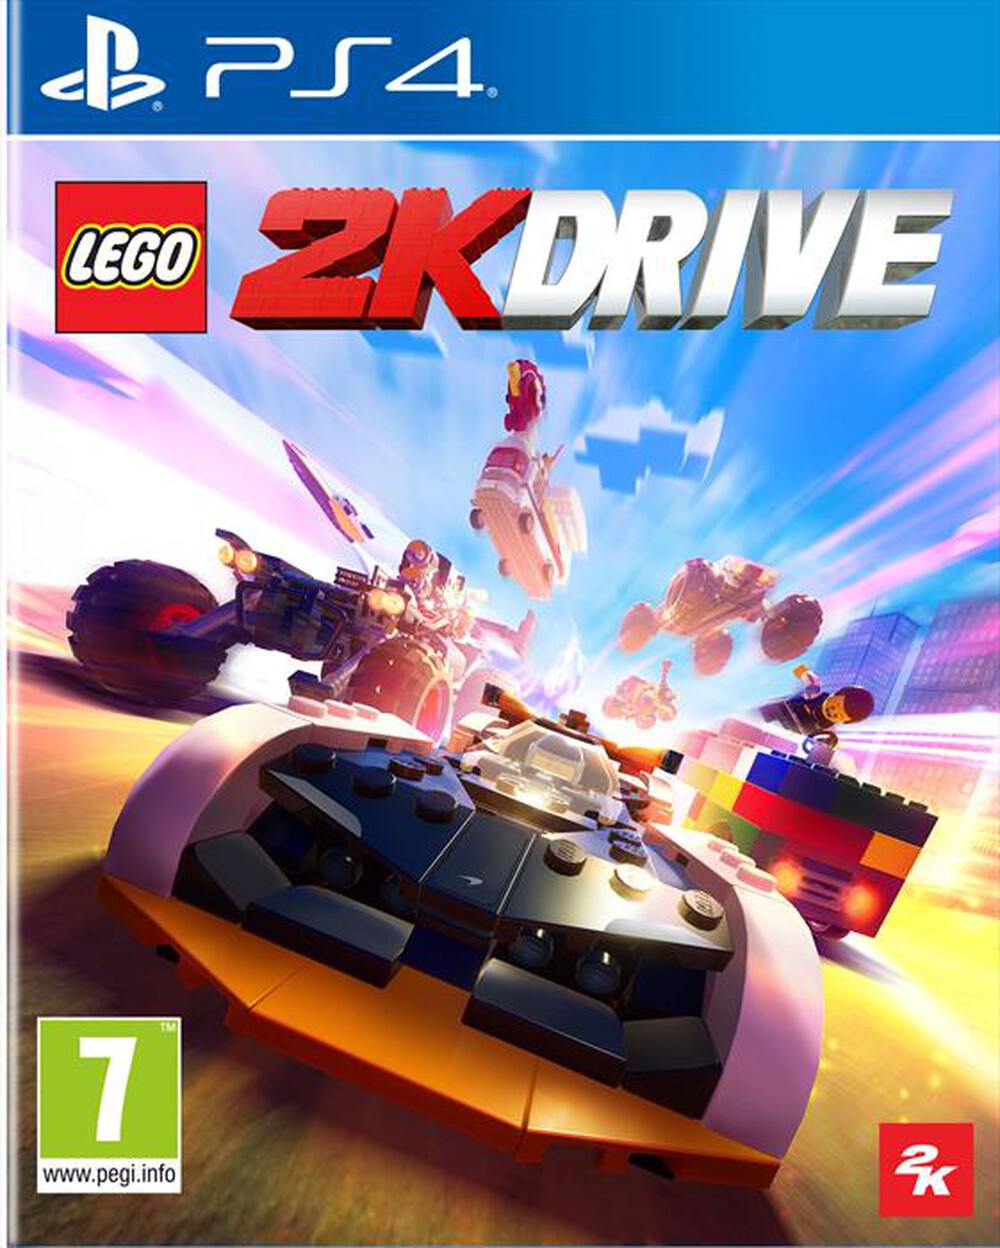 "2K GAMES - LEGO 2K DRIVE PS4"